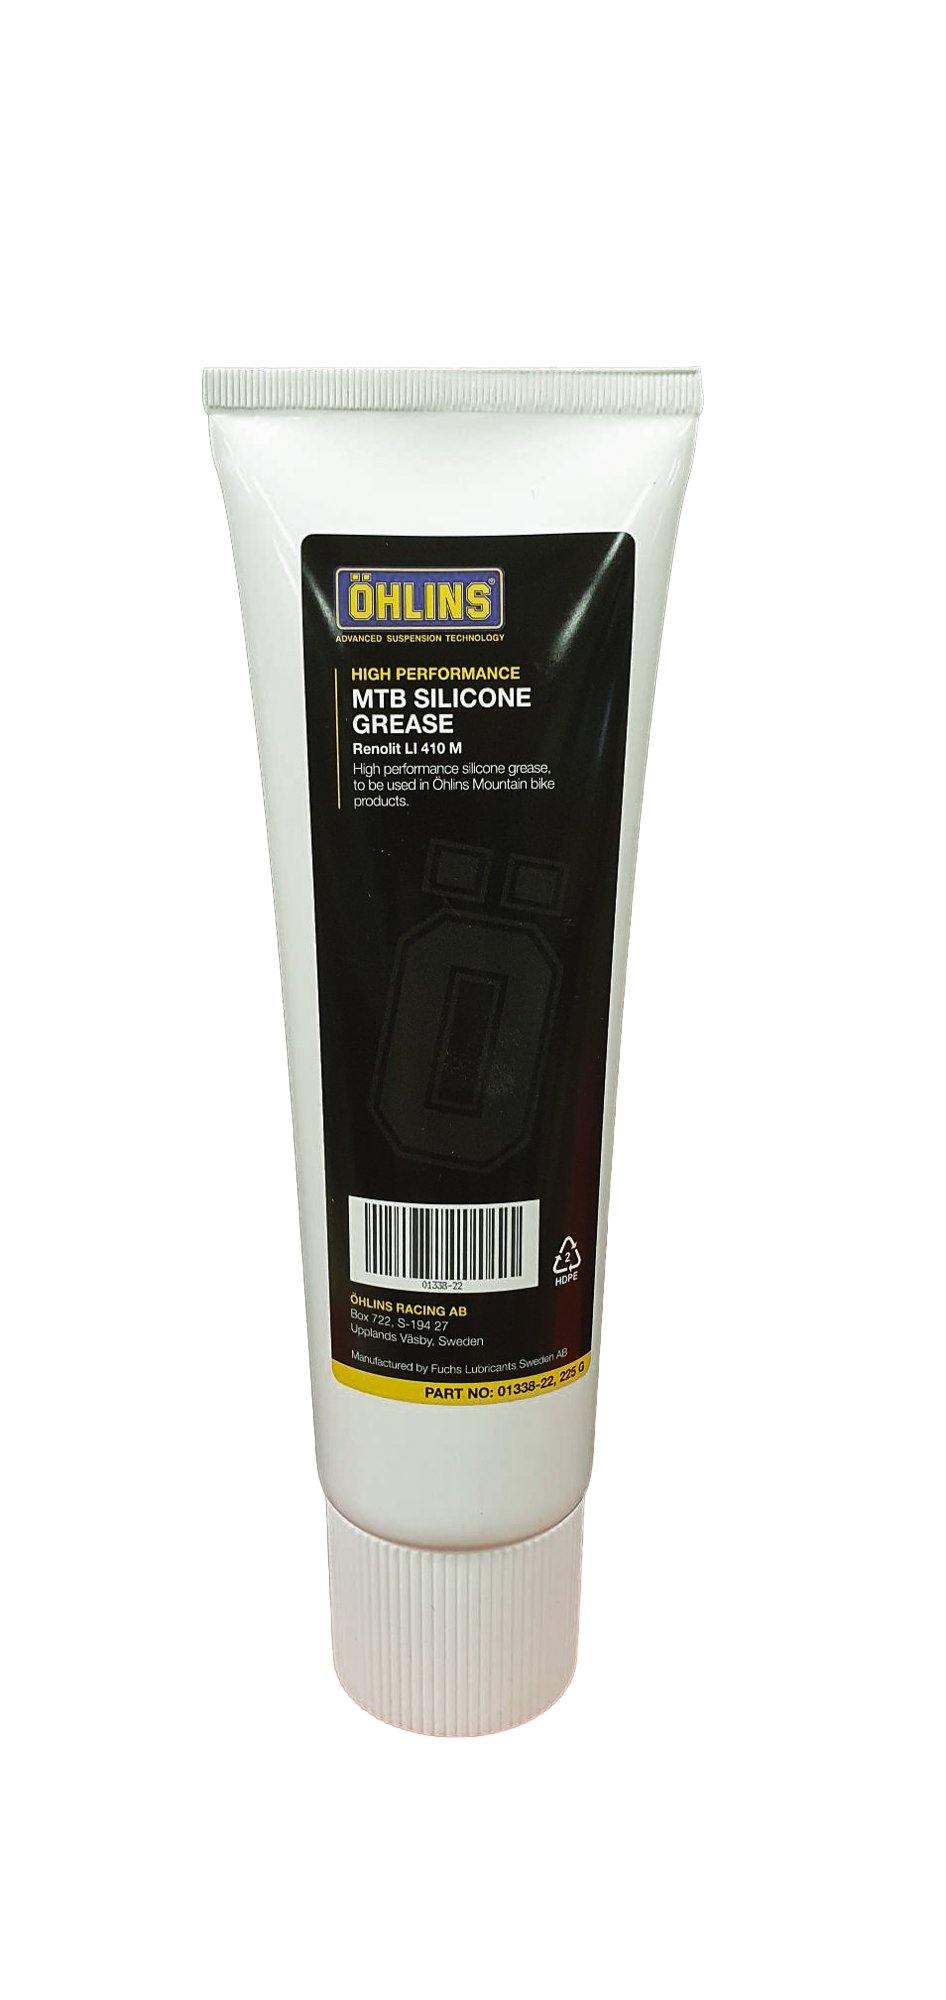 Ohlins - Renolit SI 410 M Silicone grease 225g - GAMUX